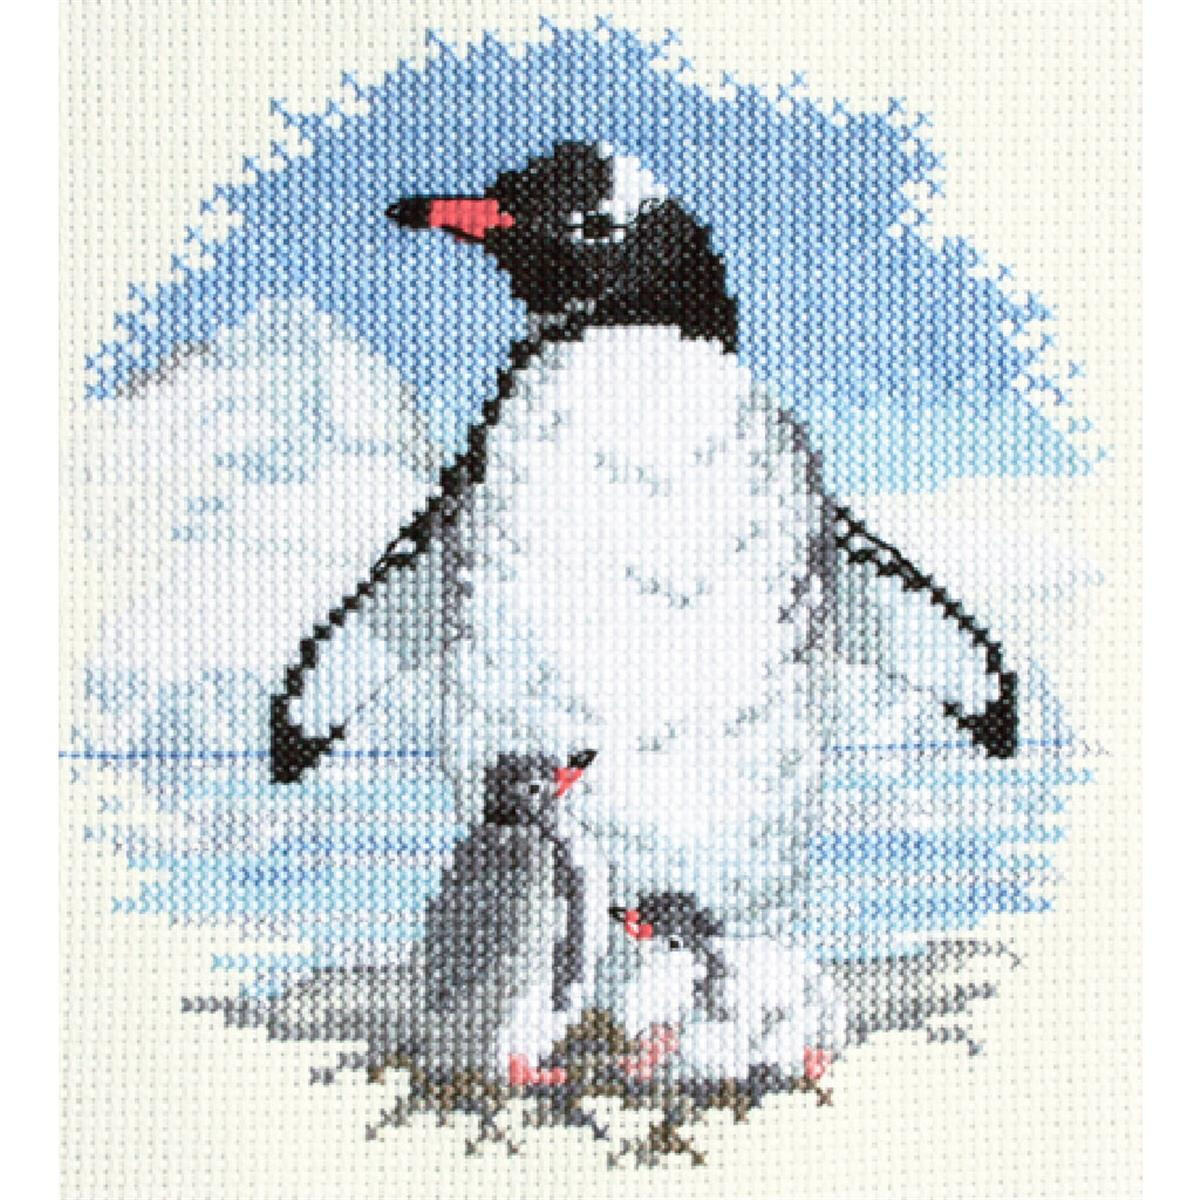 An embroidery pack from Bothy Threads showing a penguin...